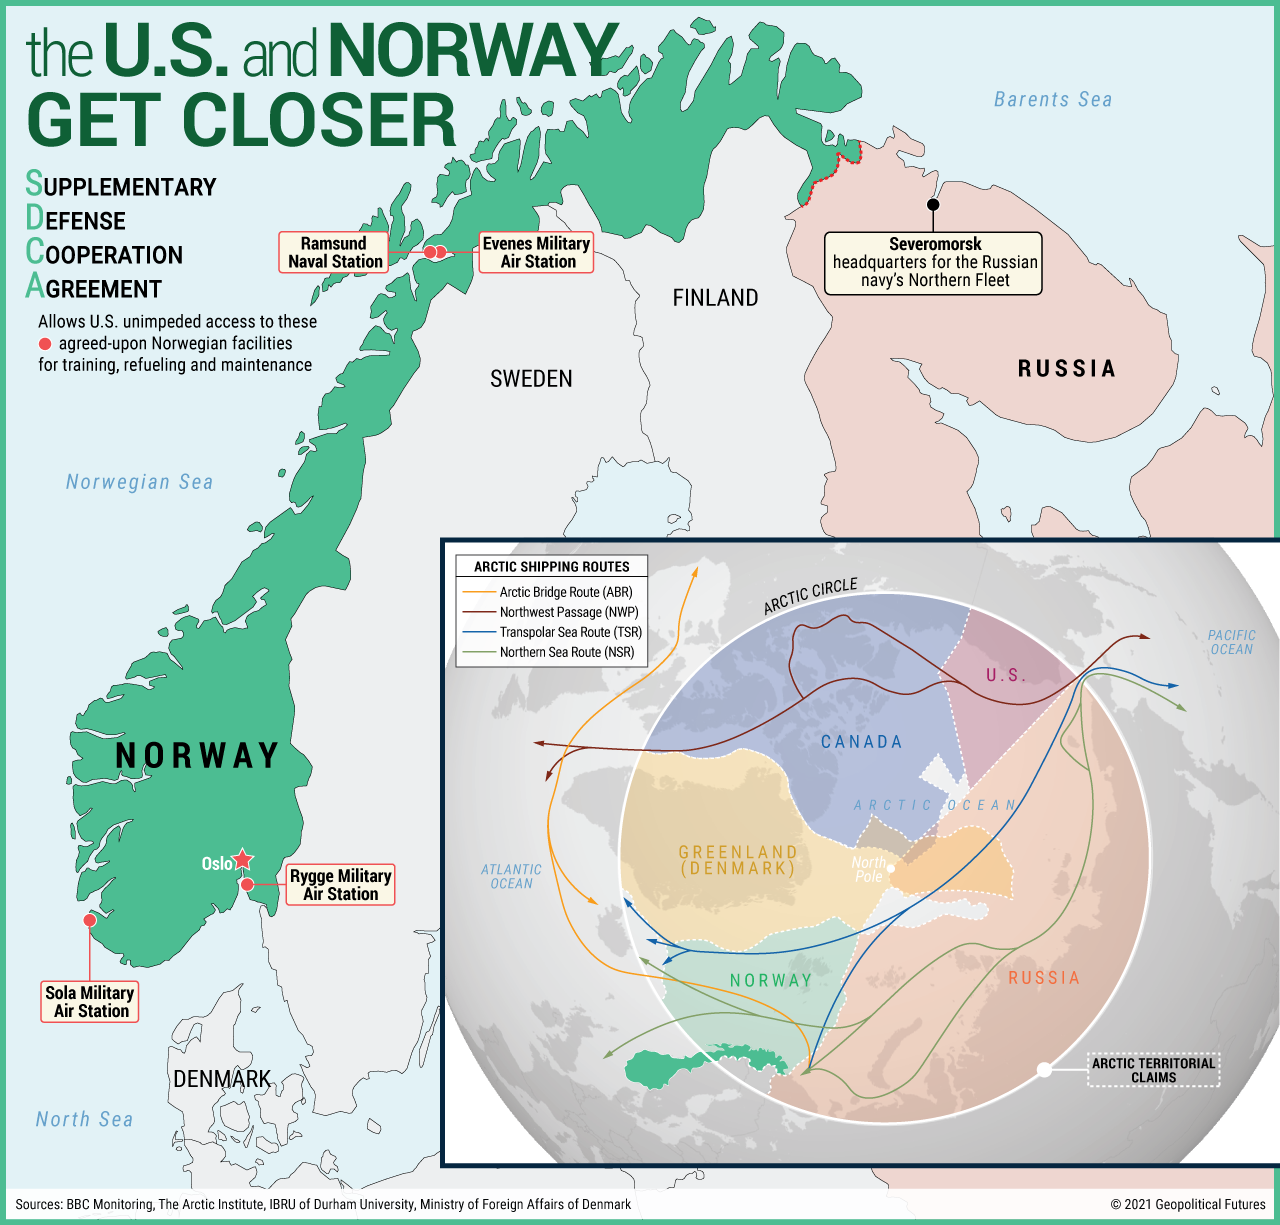 The U.S. and Norway Get Closer